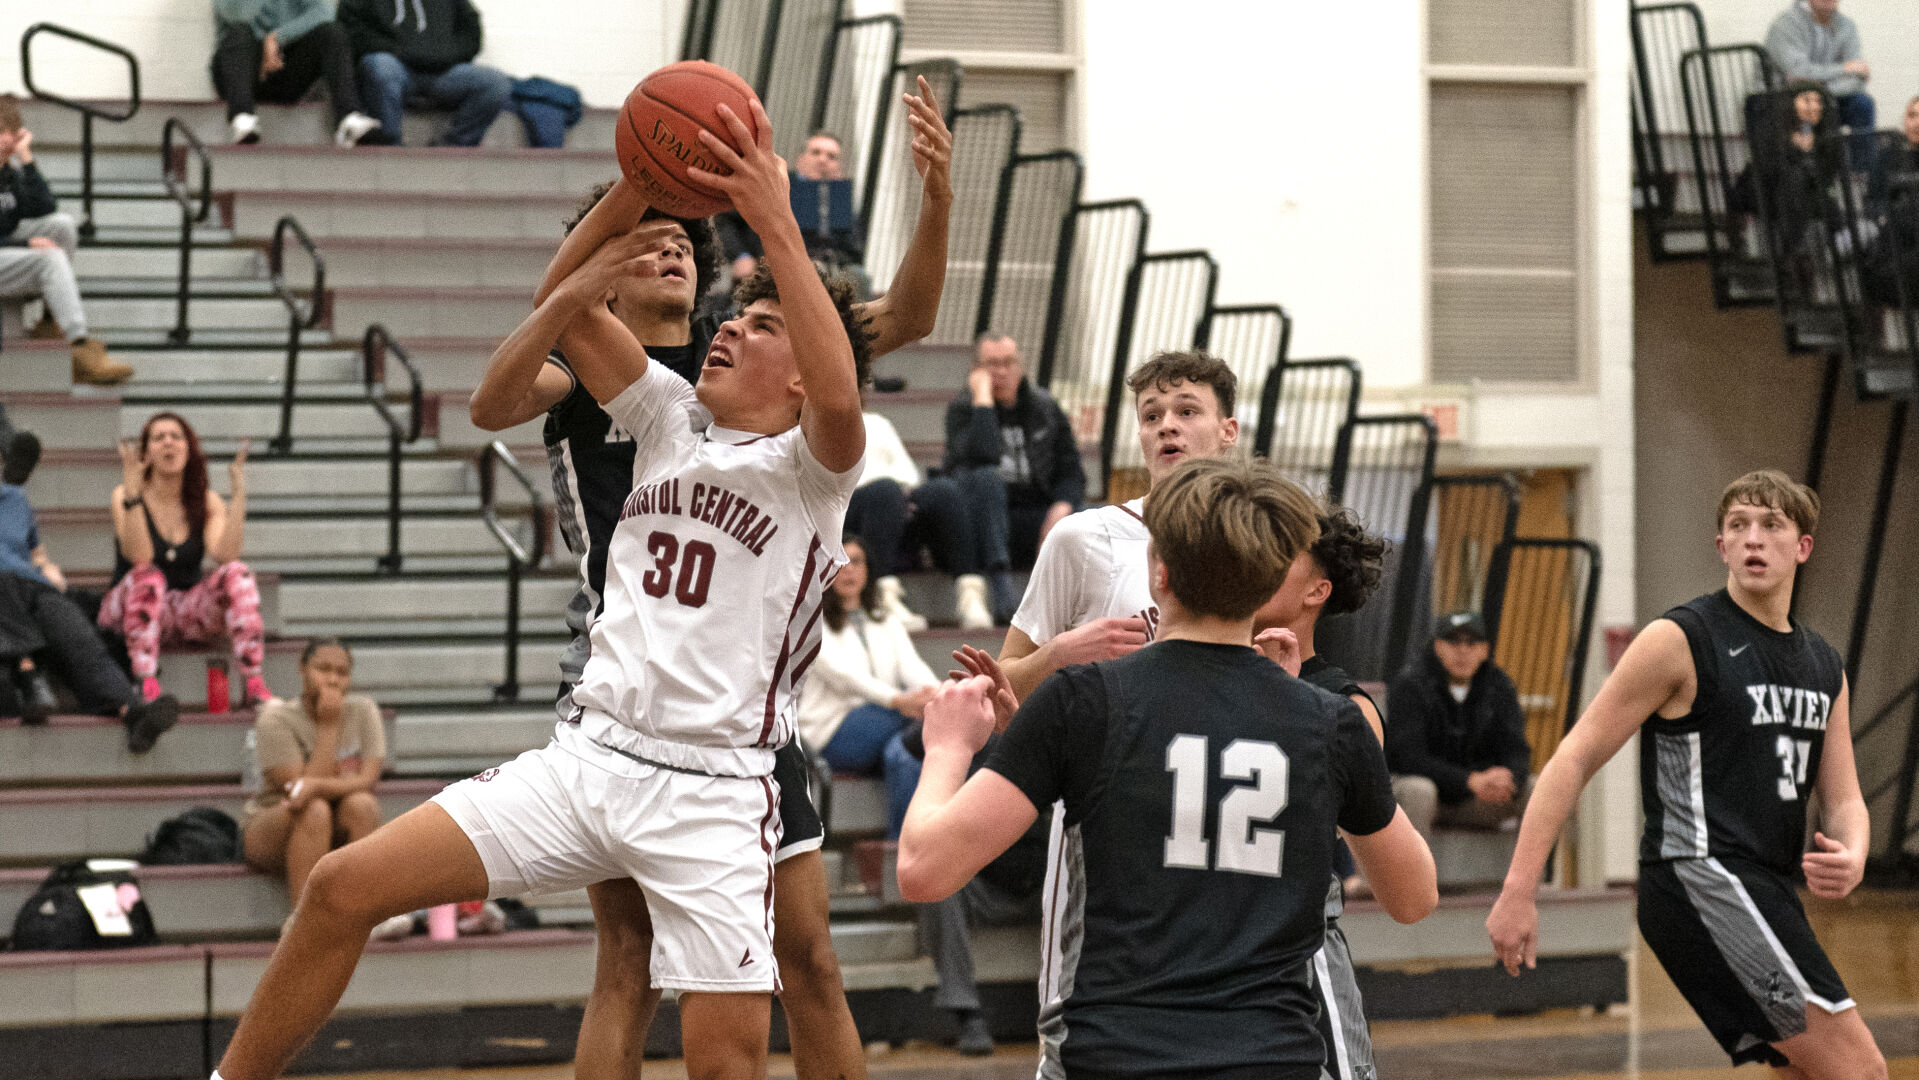 Bristol Central Boys Basketball Team Shows Signs of Improvement in Second Half of Season, Coach Tim Barrette Highlights Senior Player Michael McMahon’s Performance